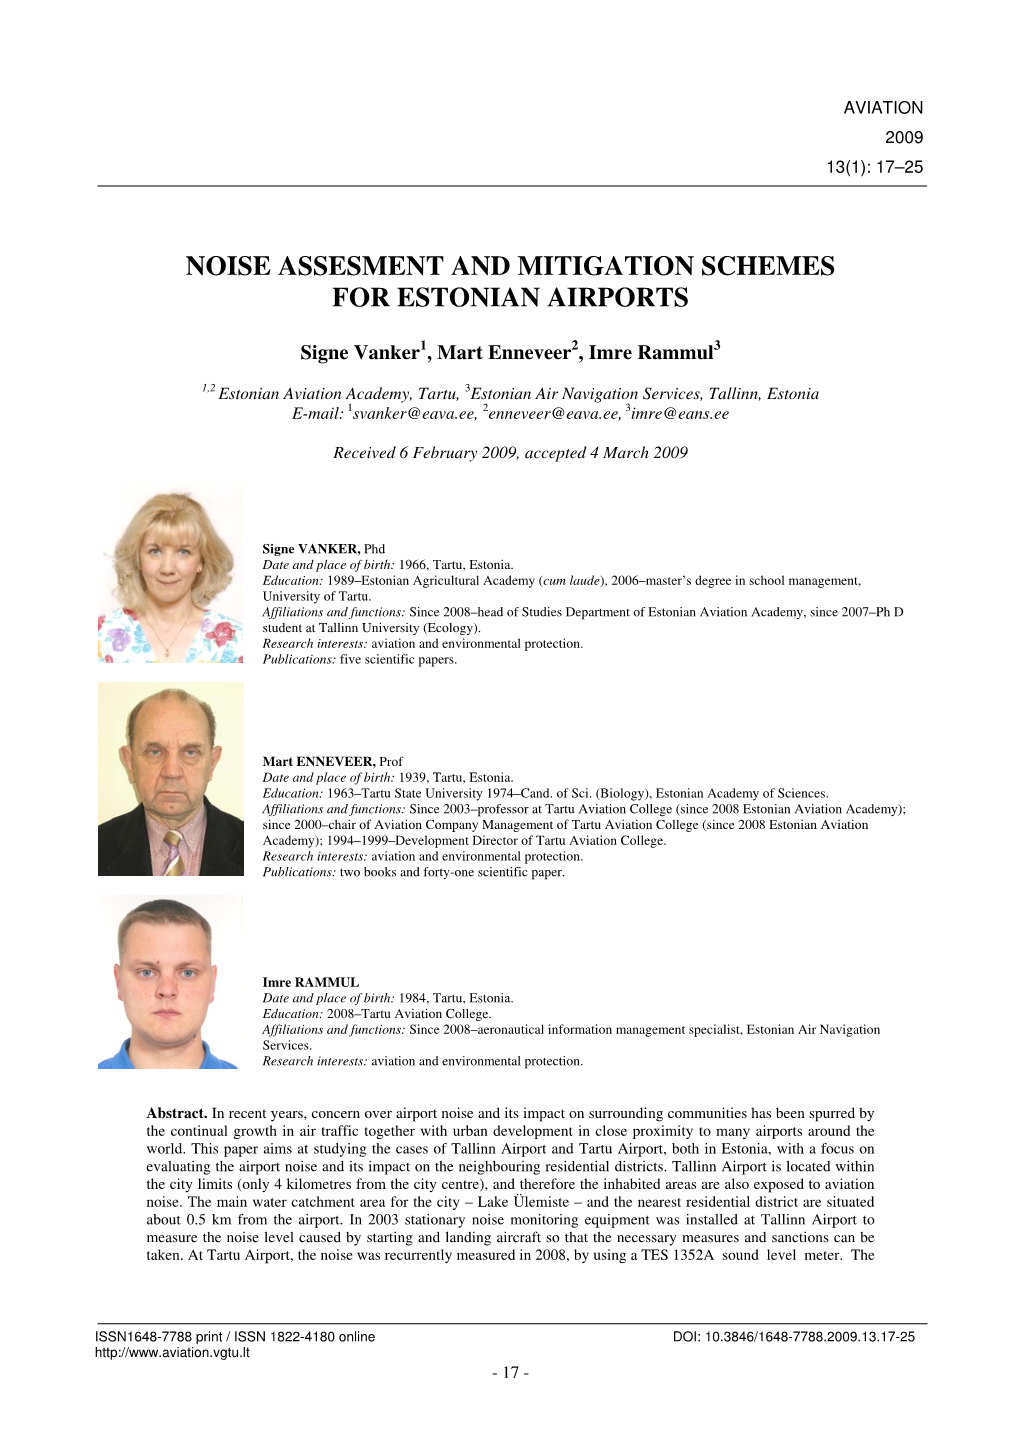 Noise Assesment and Mitigation Schemes for Estonian Airports